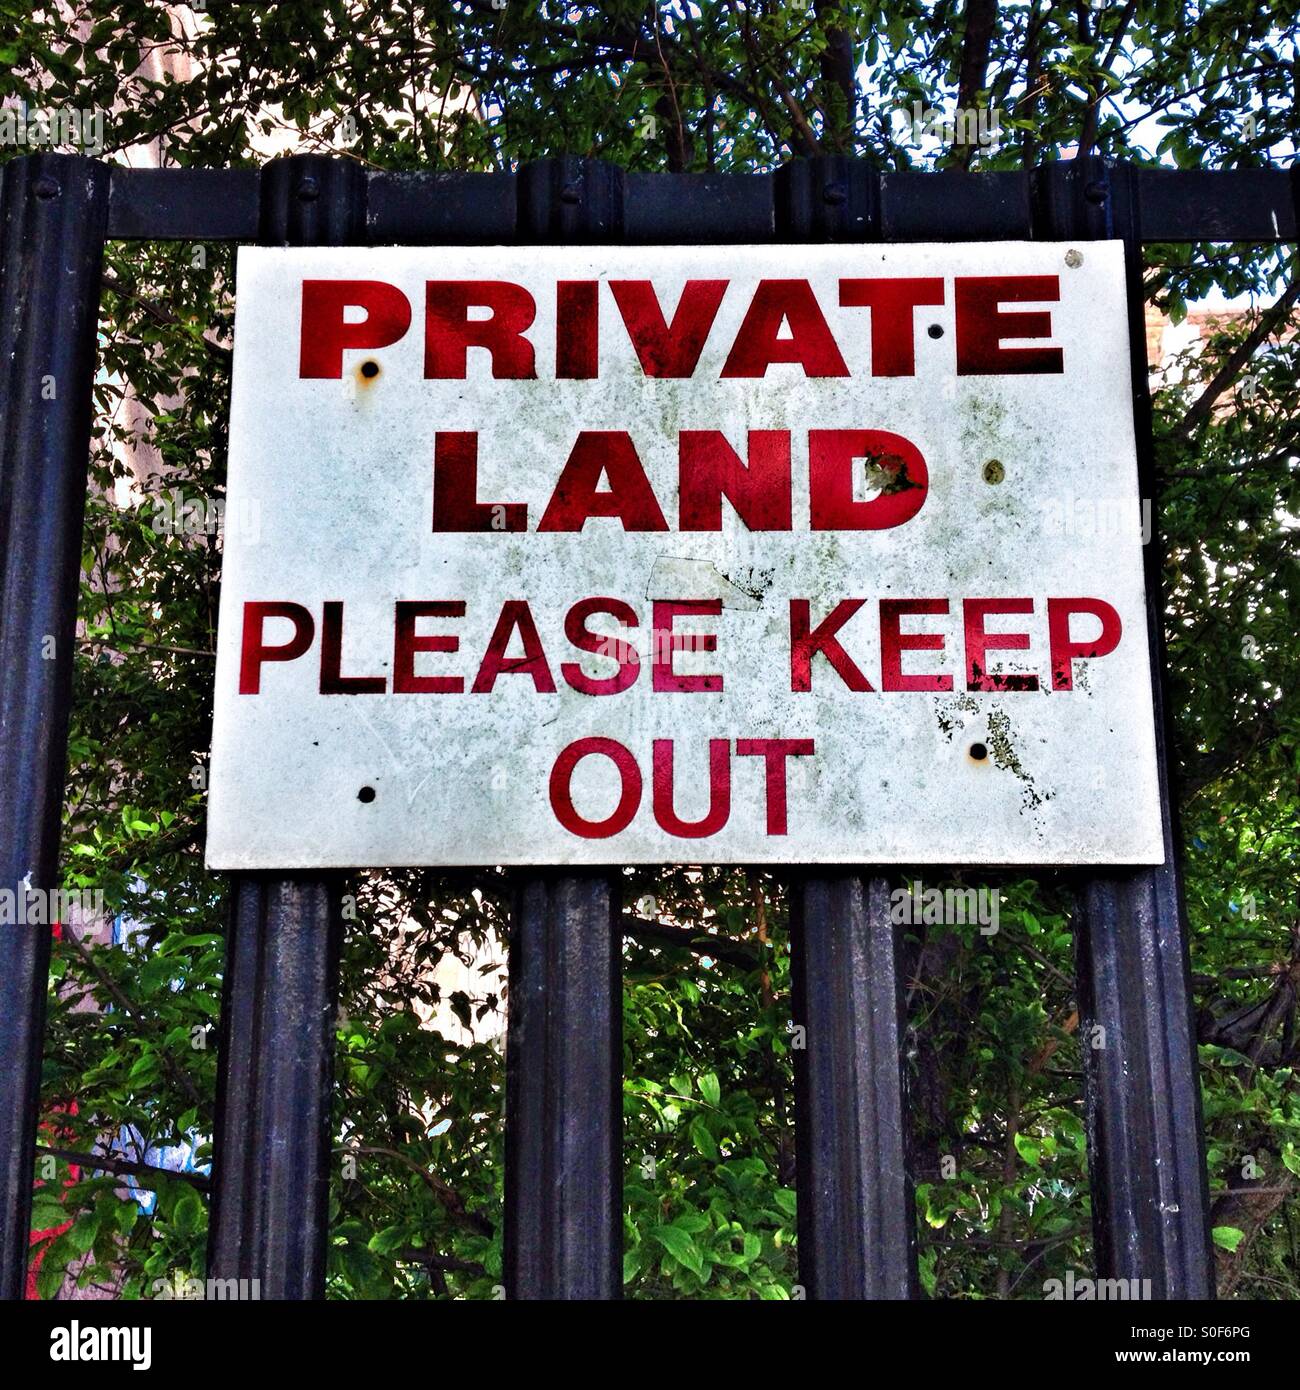 A sign reading 'PRIVATE LAND PLEASE KEEP OUT' Stock Photo